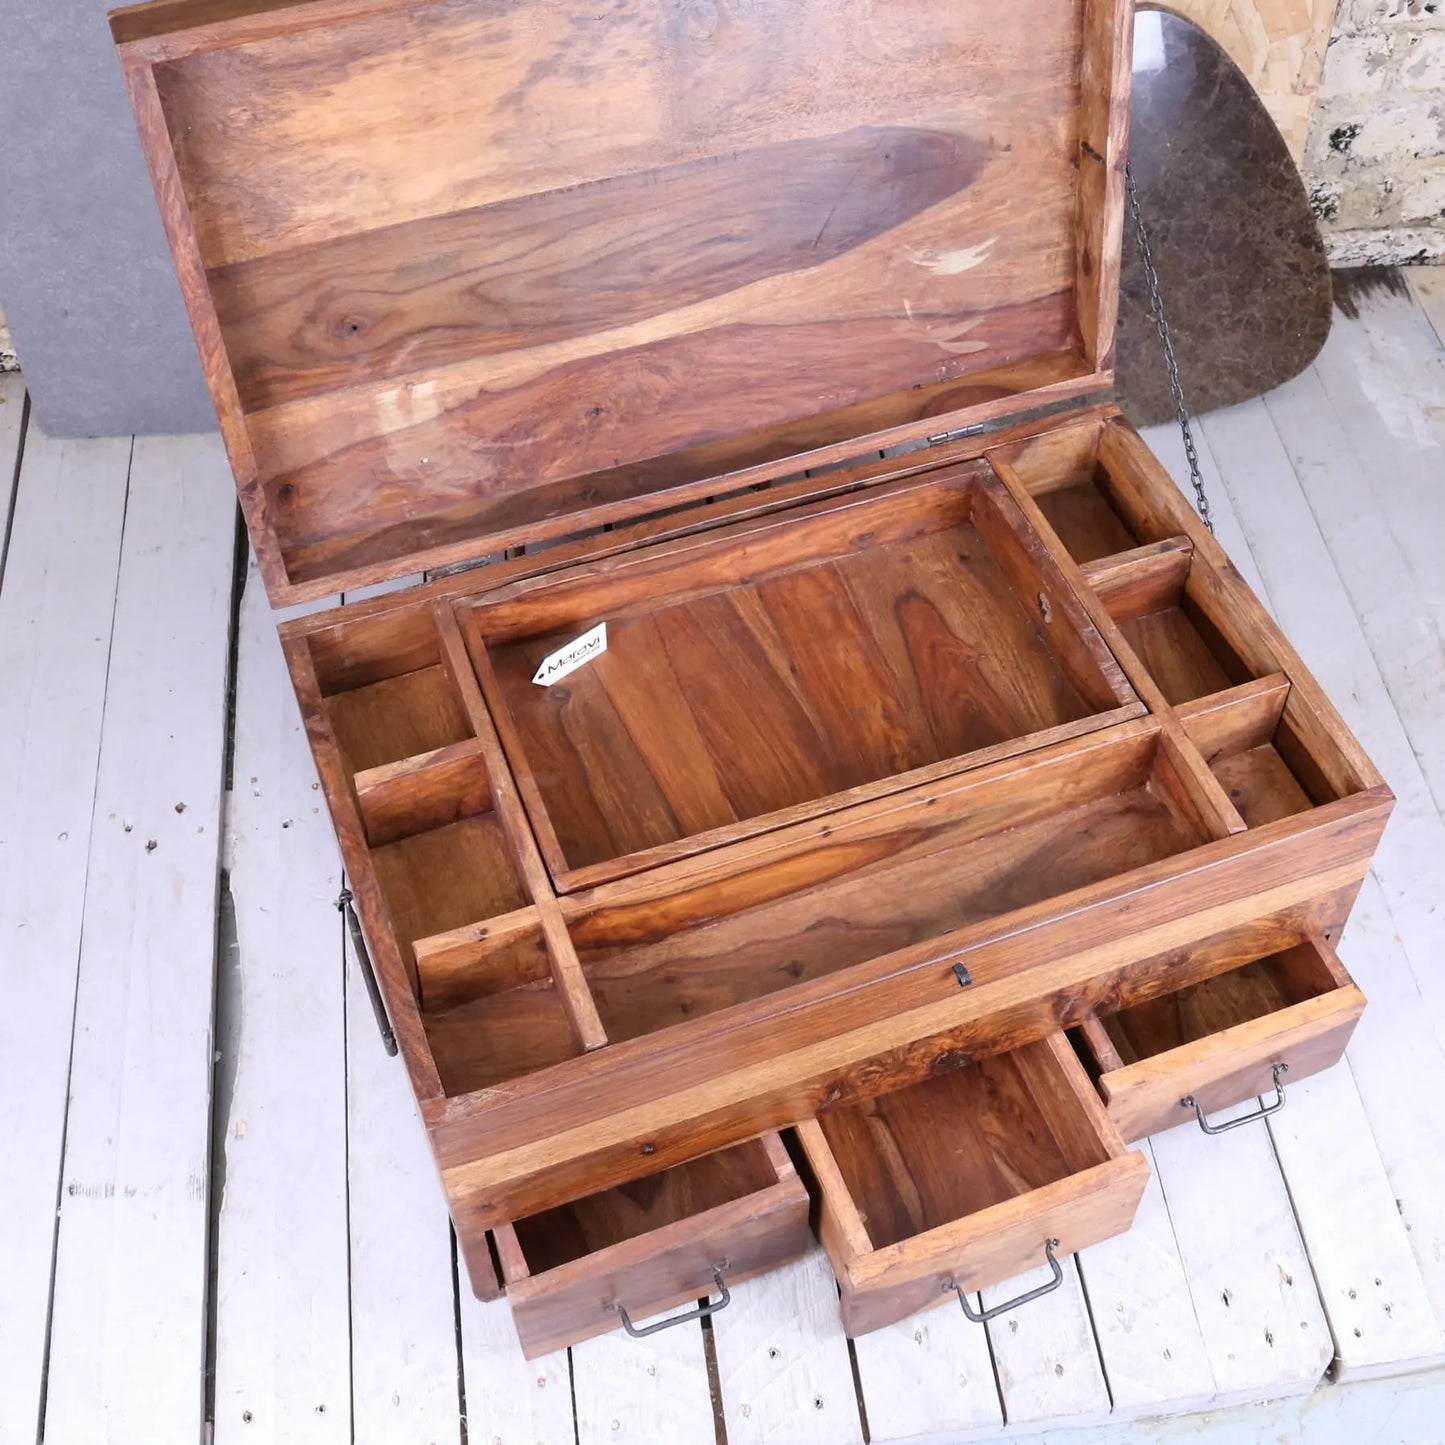 Large Wooden Storage Chest - Top View Open